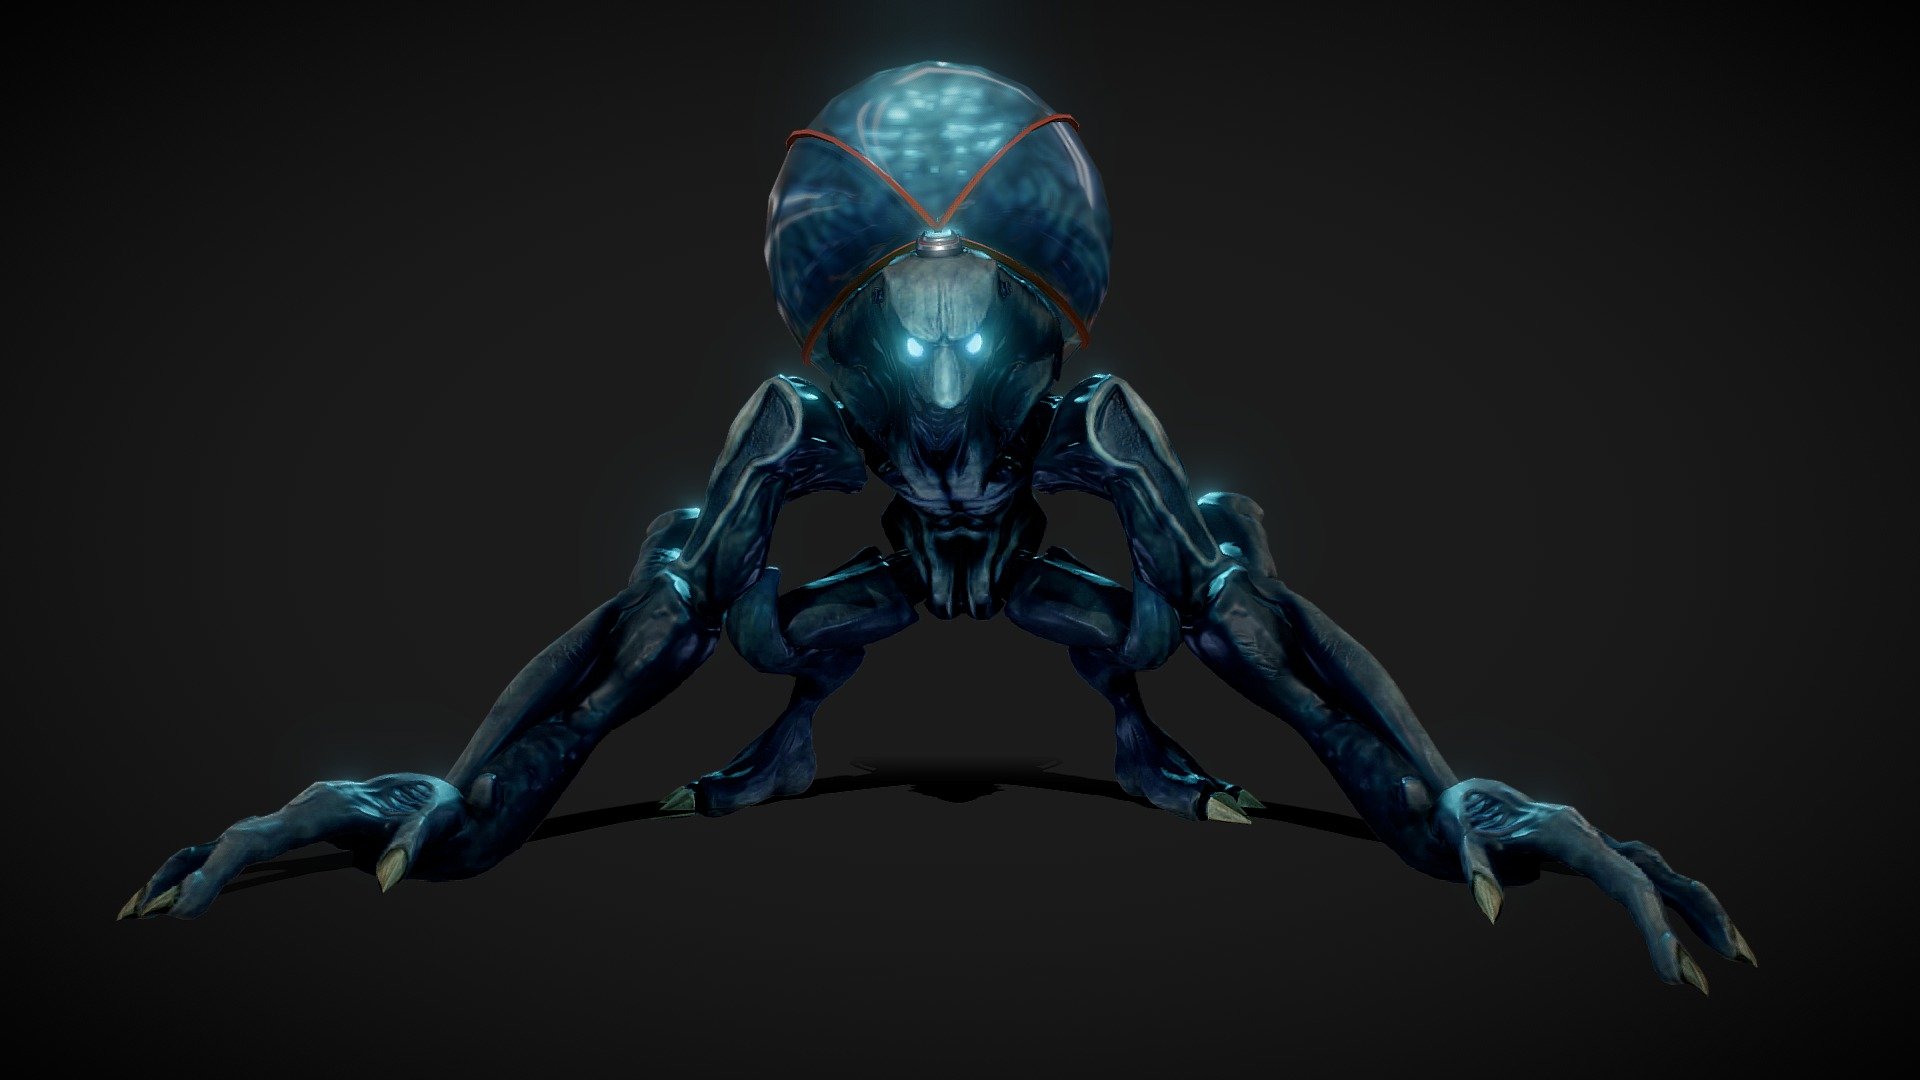 Big Brain Alien with Psychic Powers - Game Ready&nbsp;

Additional File Contains separate animations

4k PBR Textures&nbsp;

Rigged

Animations Include:

* Idle

* Walk

* Run

* Death

* Melee Attack

* Ranged Attack - Alien - Buy Royalty Free 3D model by rvh 3d model